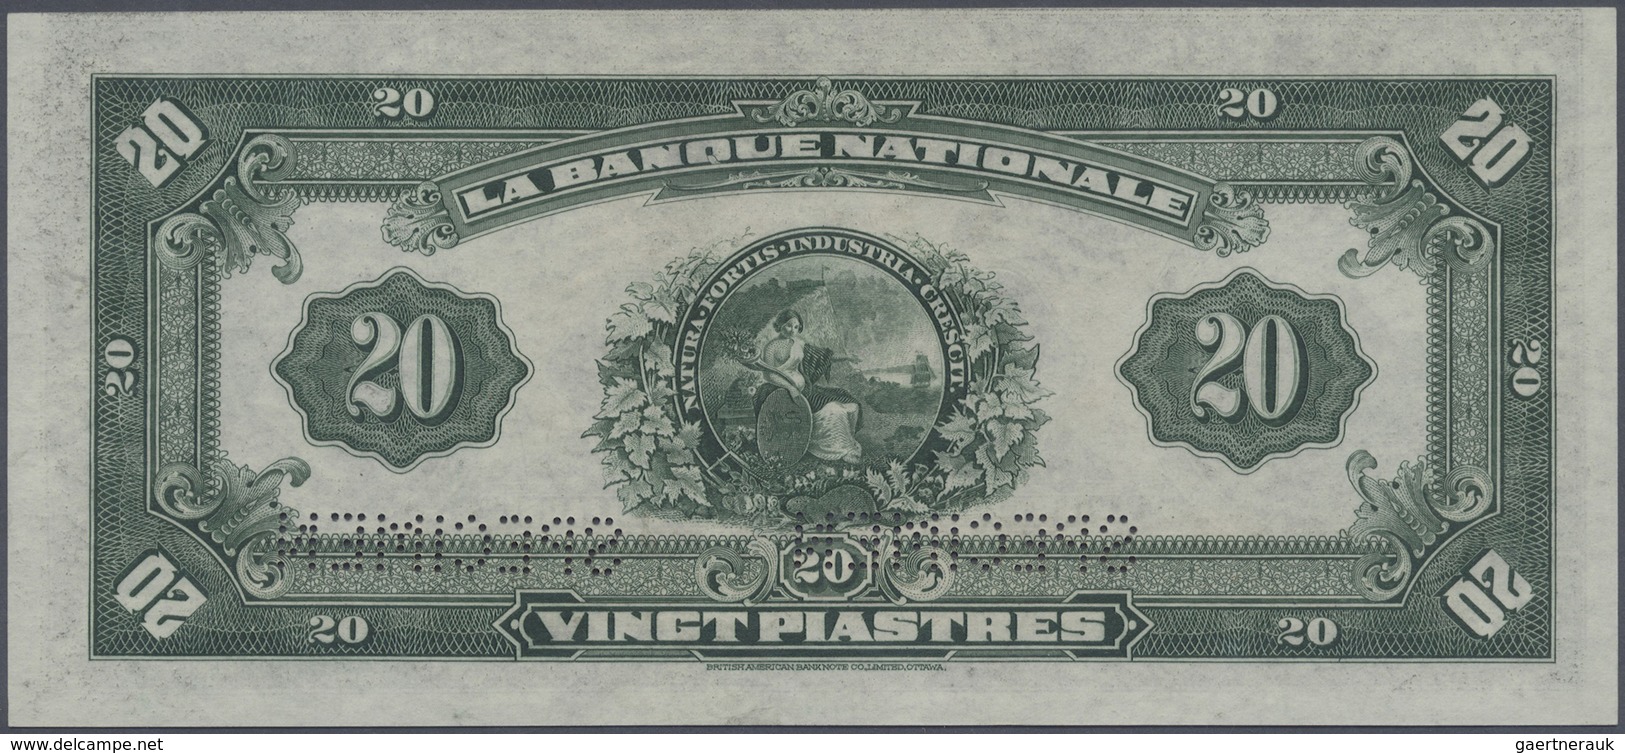 Canada: 20 Dollars / 20 Piastres 1922 Specimen P. S873s Issued By "La Banque Nationale" With Two "Sp - Canada